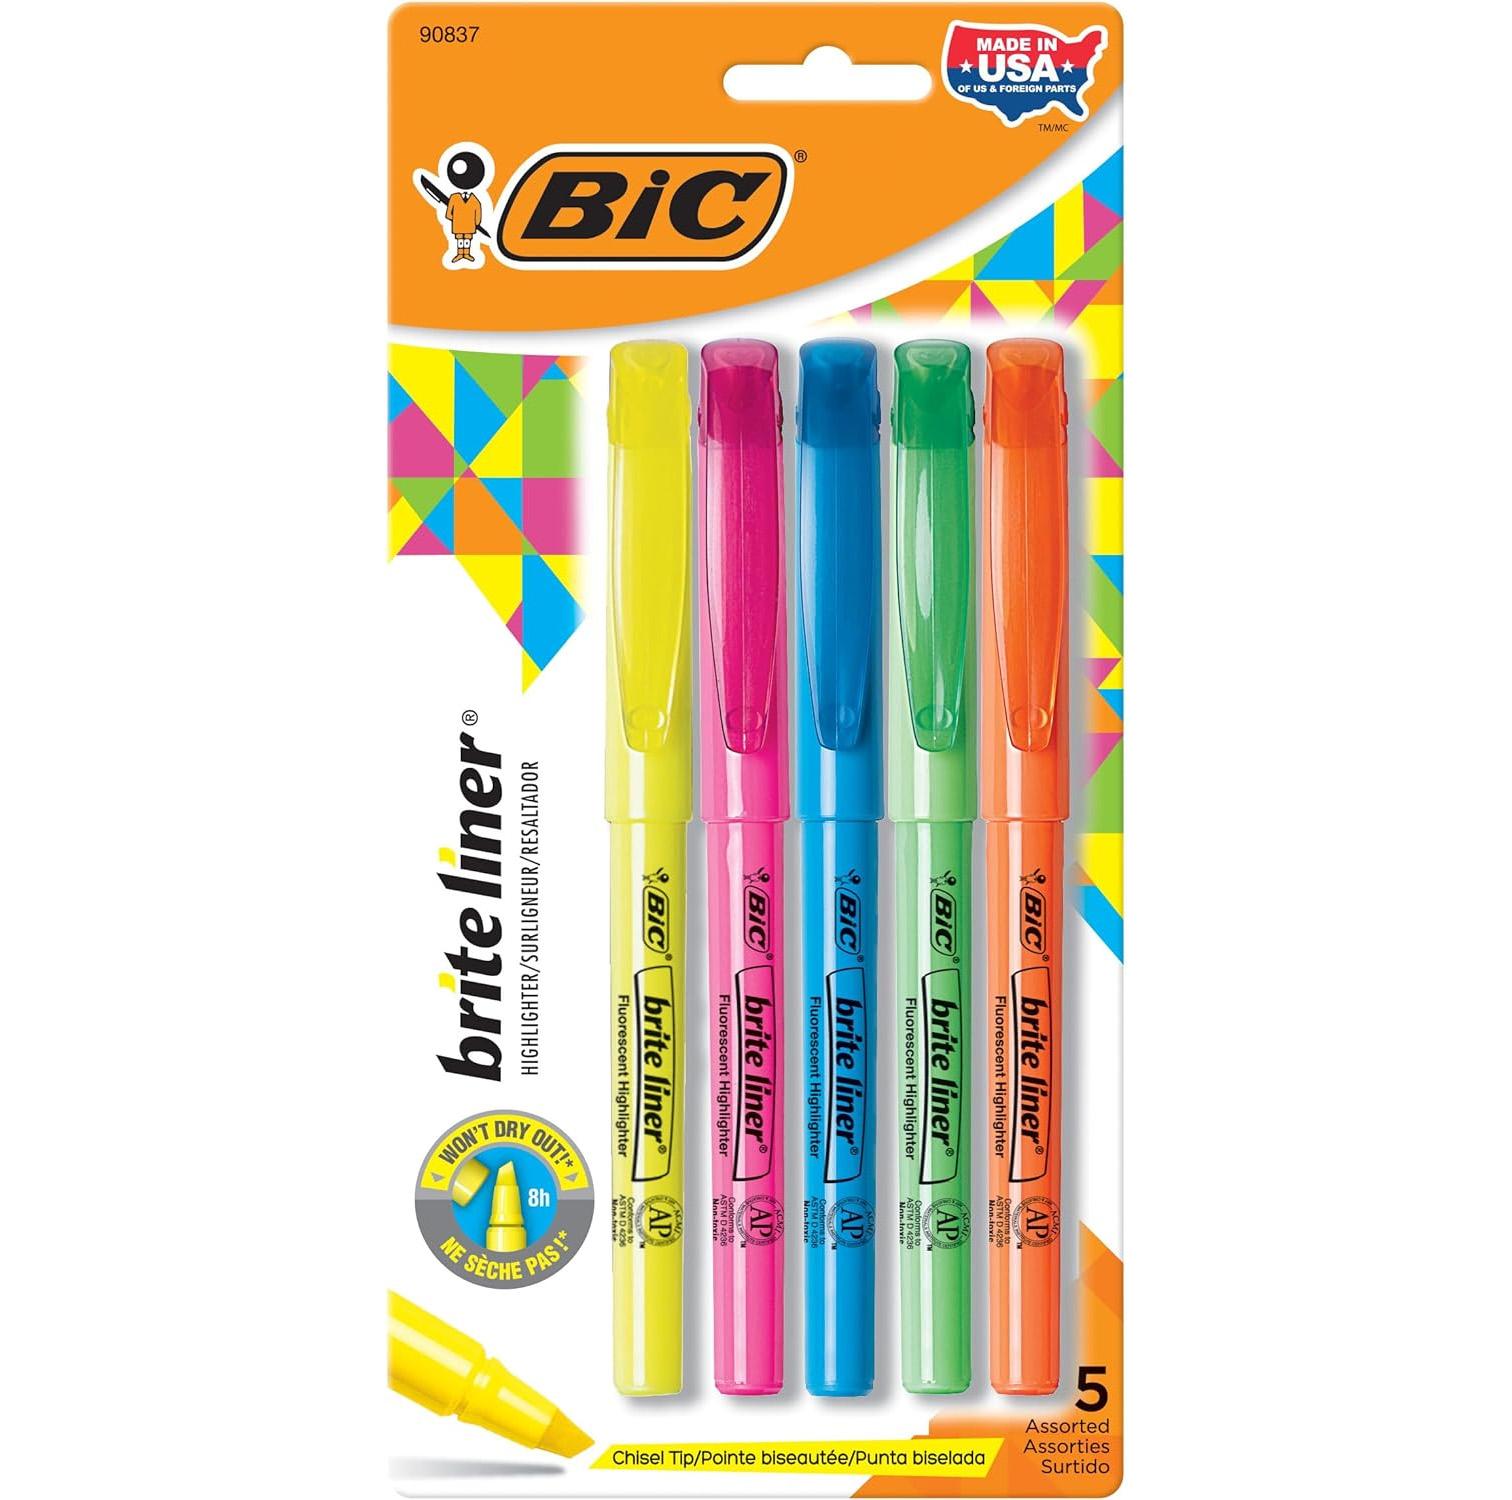 BIC Brite Liner Highlighters 5 Pack for $1.63